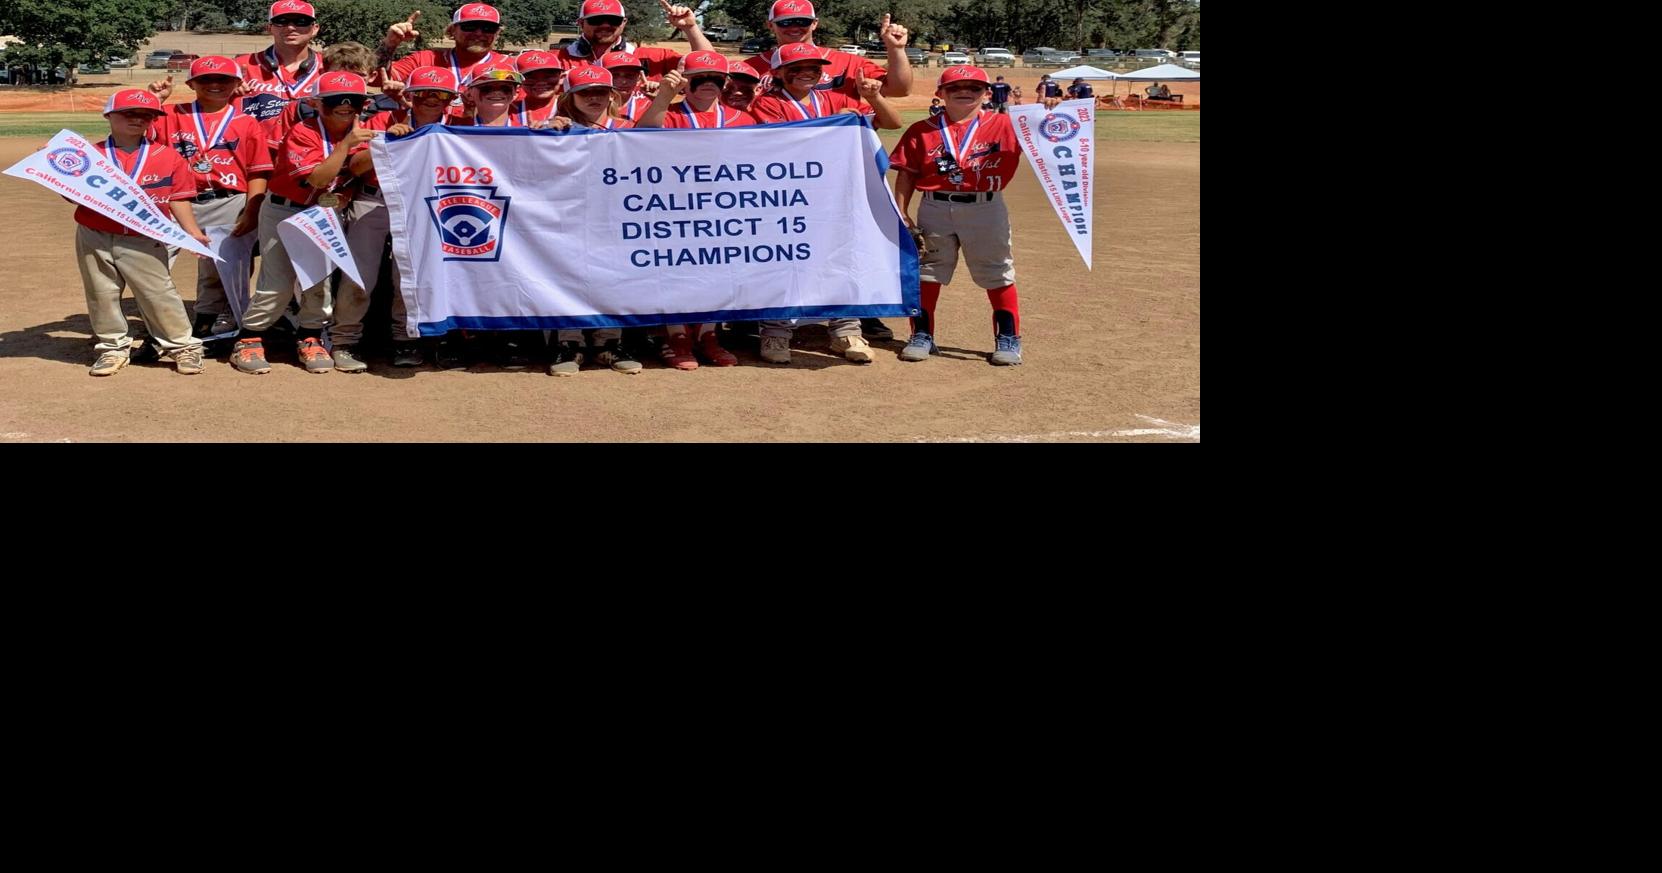 Amador West Mudhens win District 15 Little League Tournament of Champions, In the Game